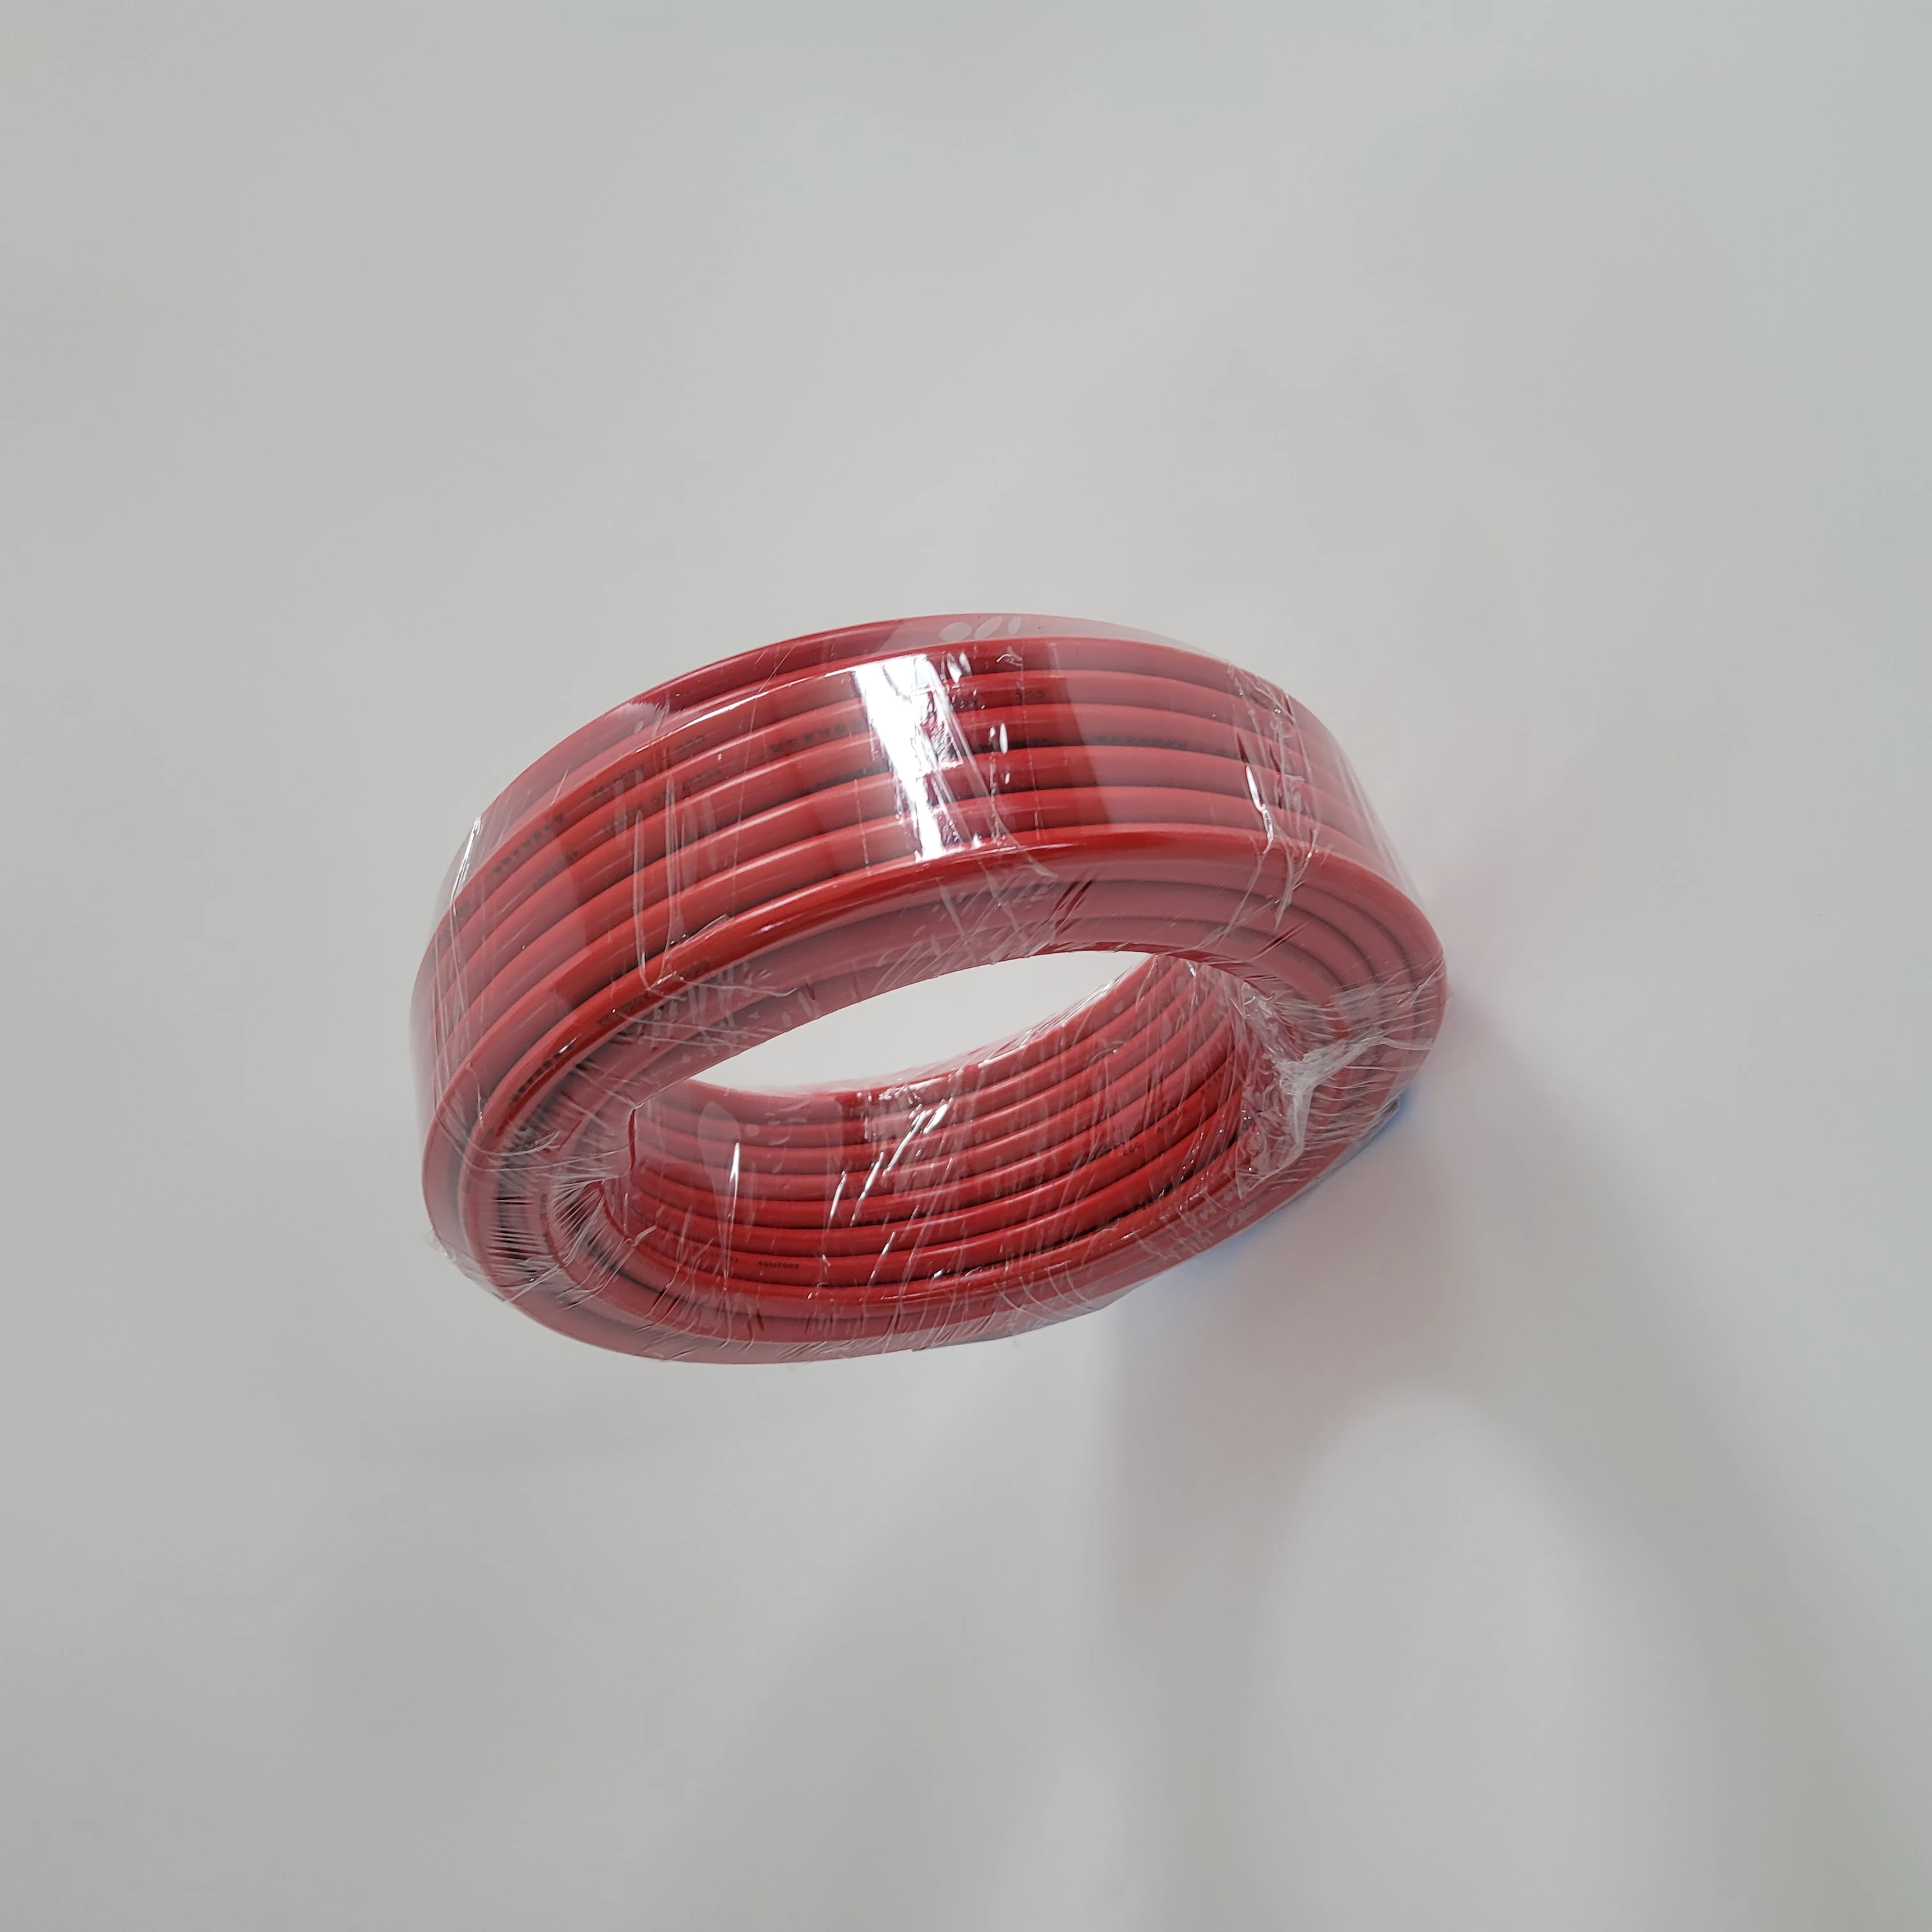 Red any square RV copper nice quality wire and cable household product easy to install